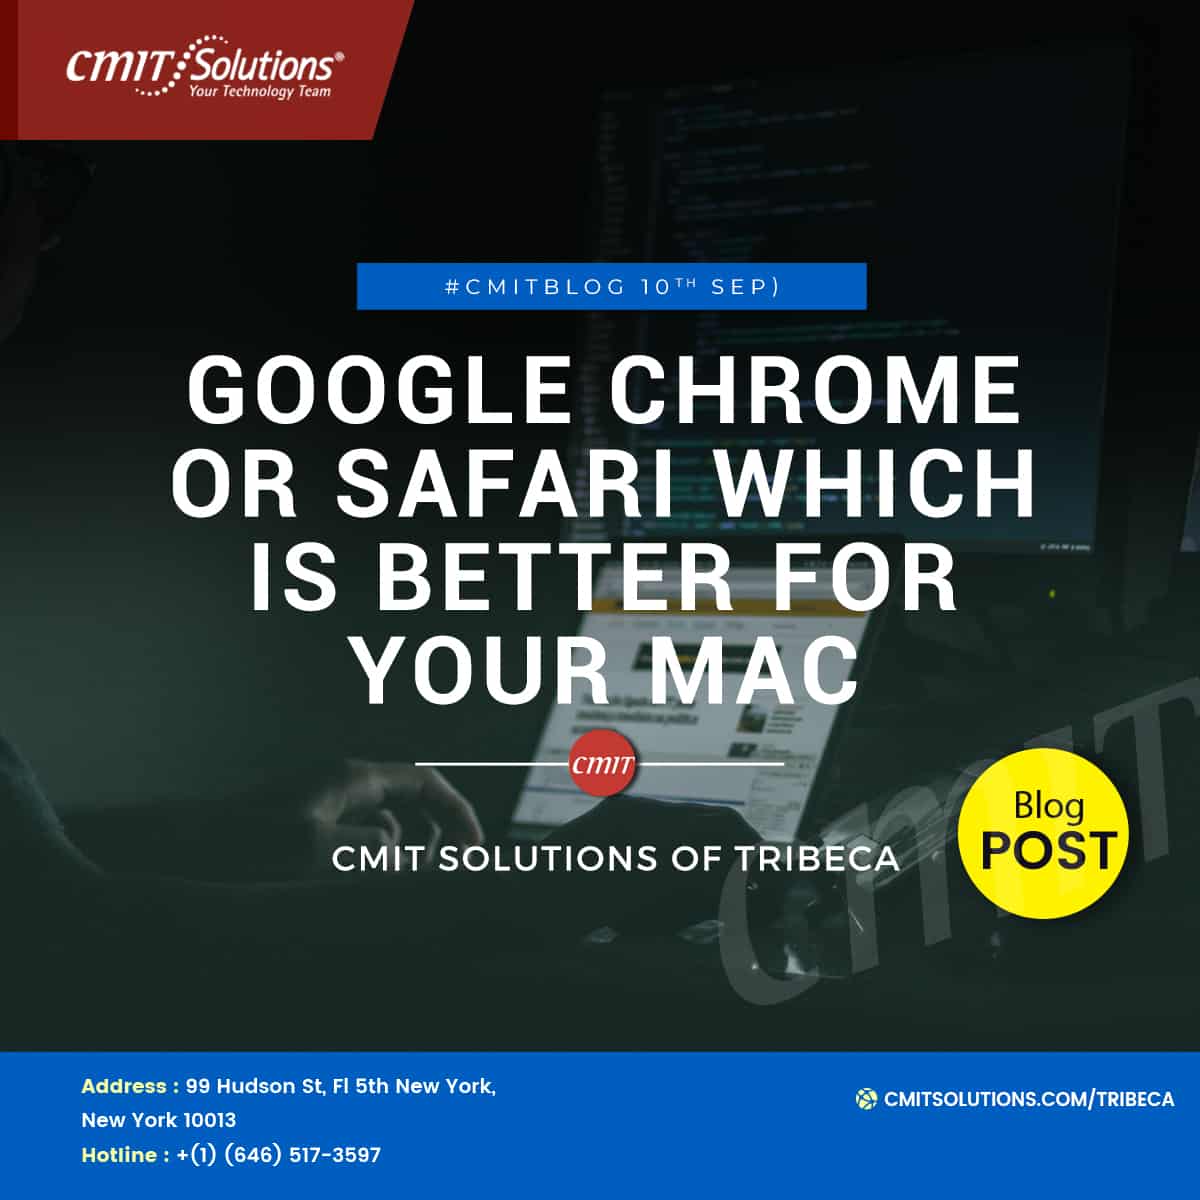 Google Chrome or Safari which is better for your mac